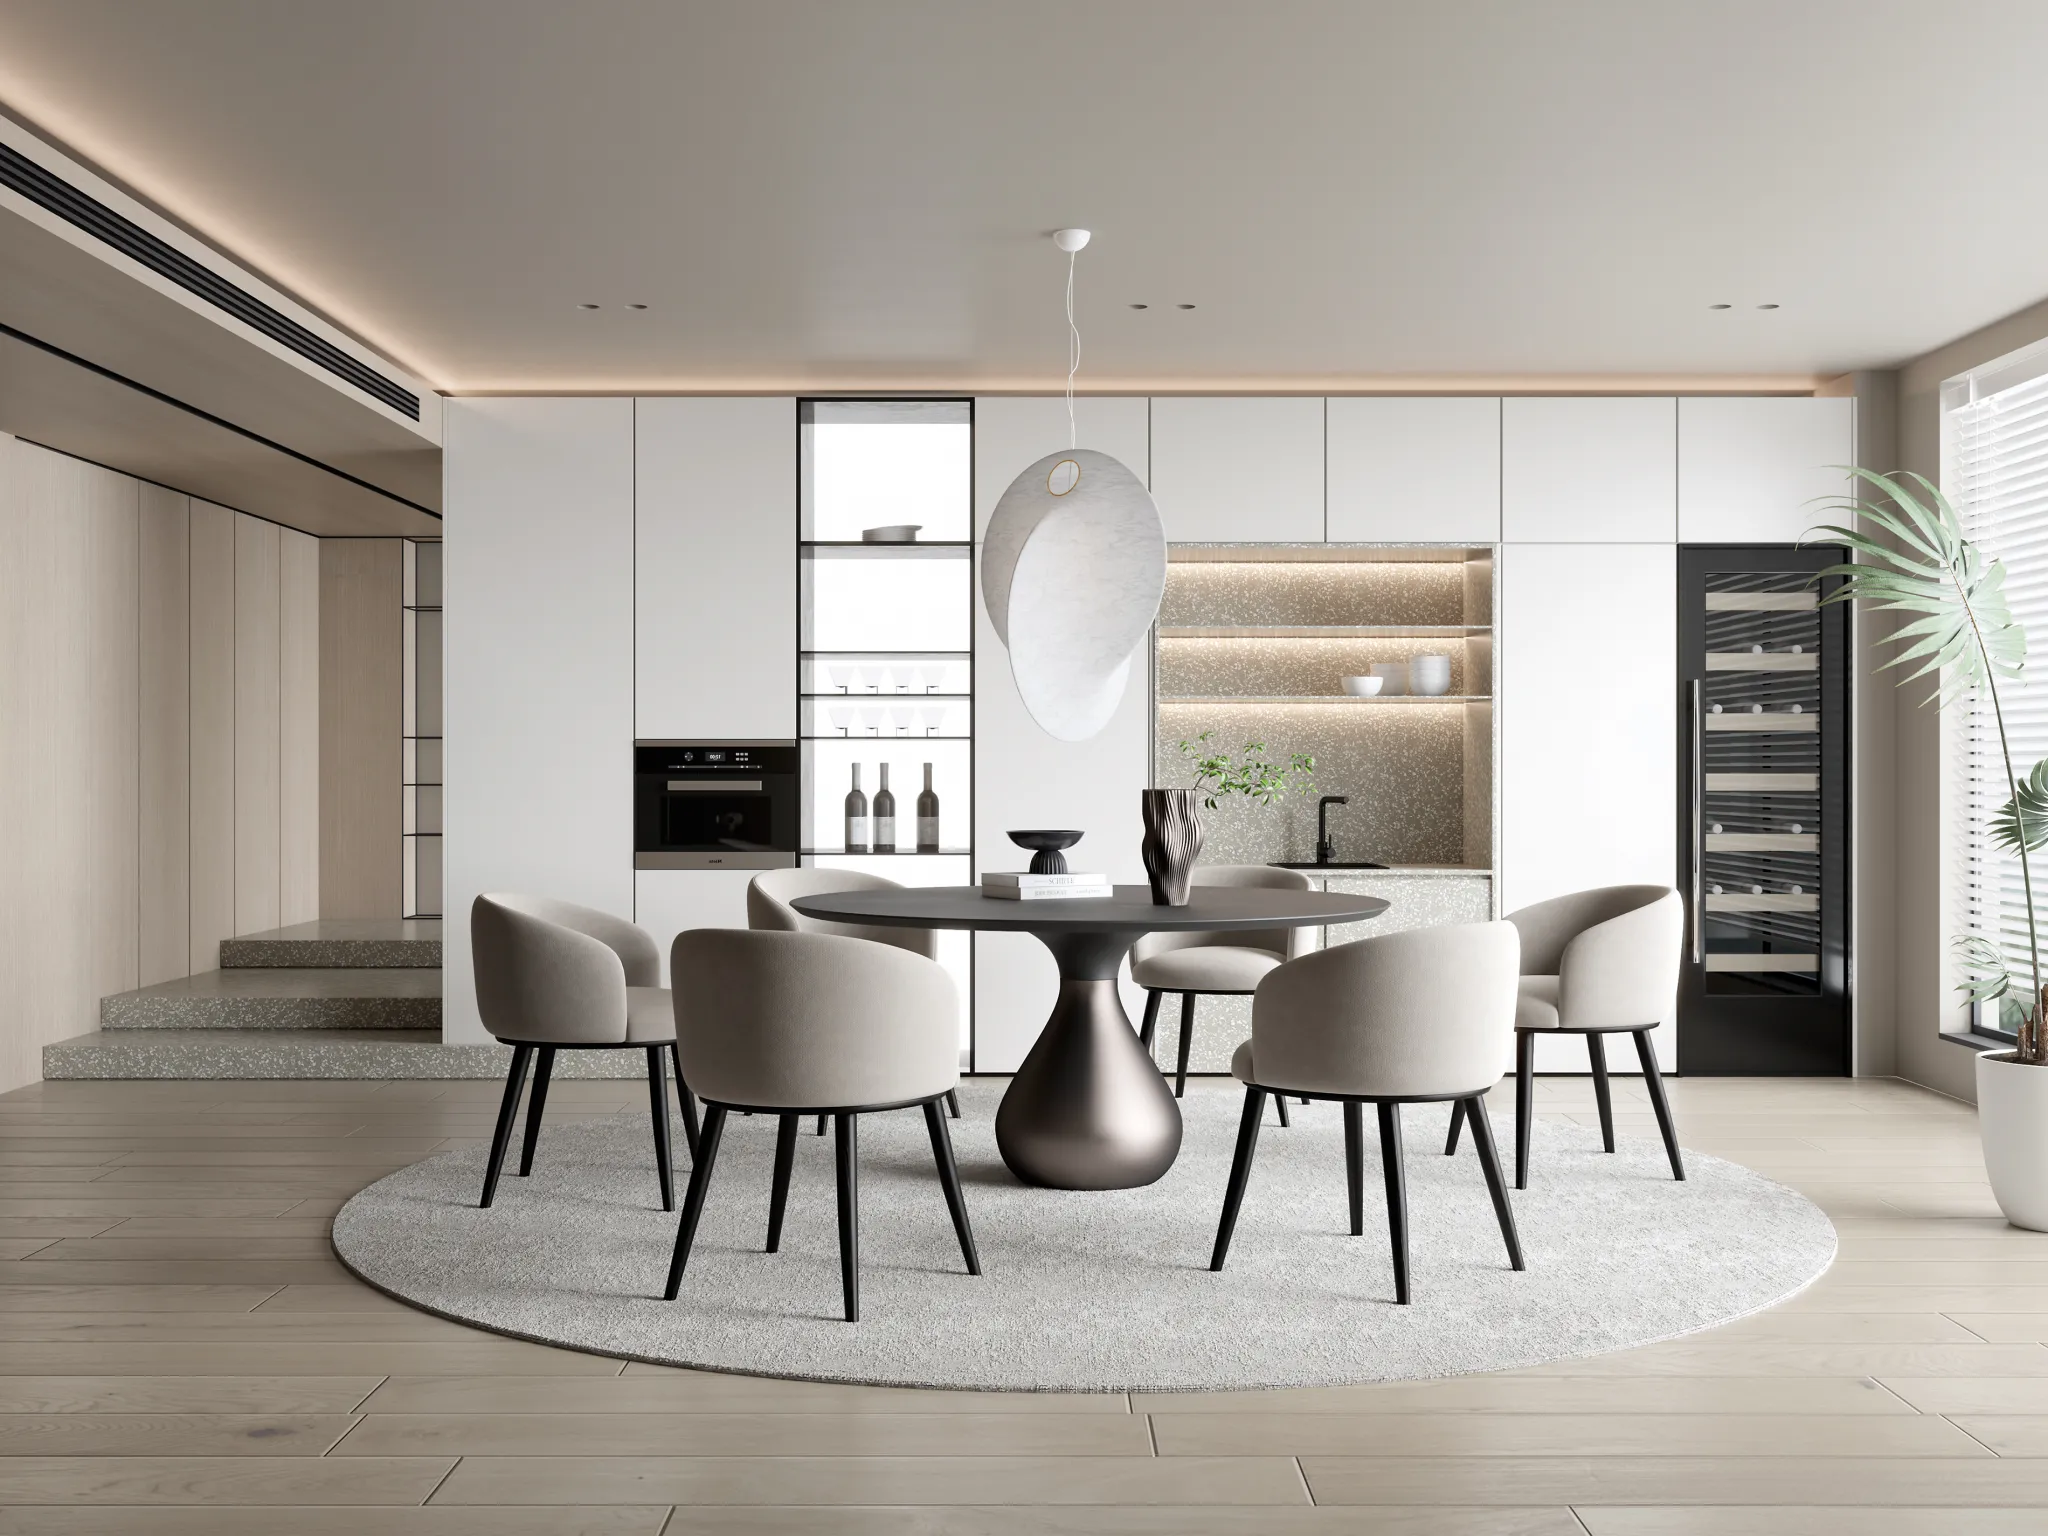 HOUSE SPACE 3D SCENES – DINING ROOM – 0021